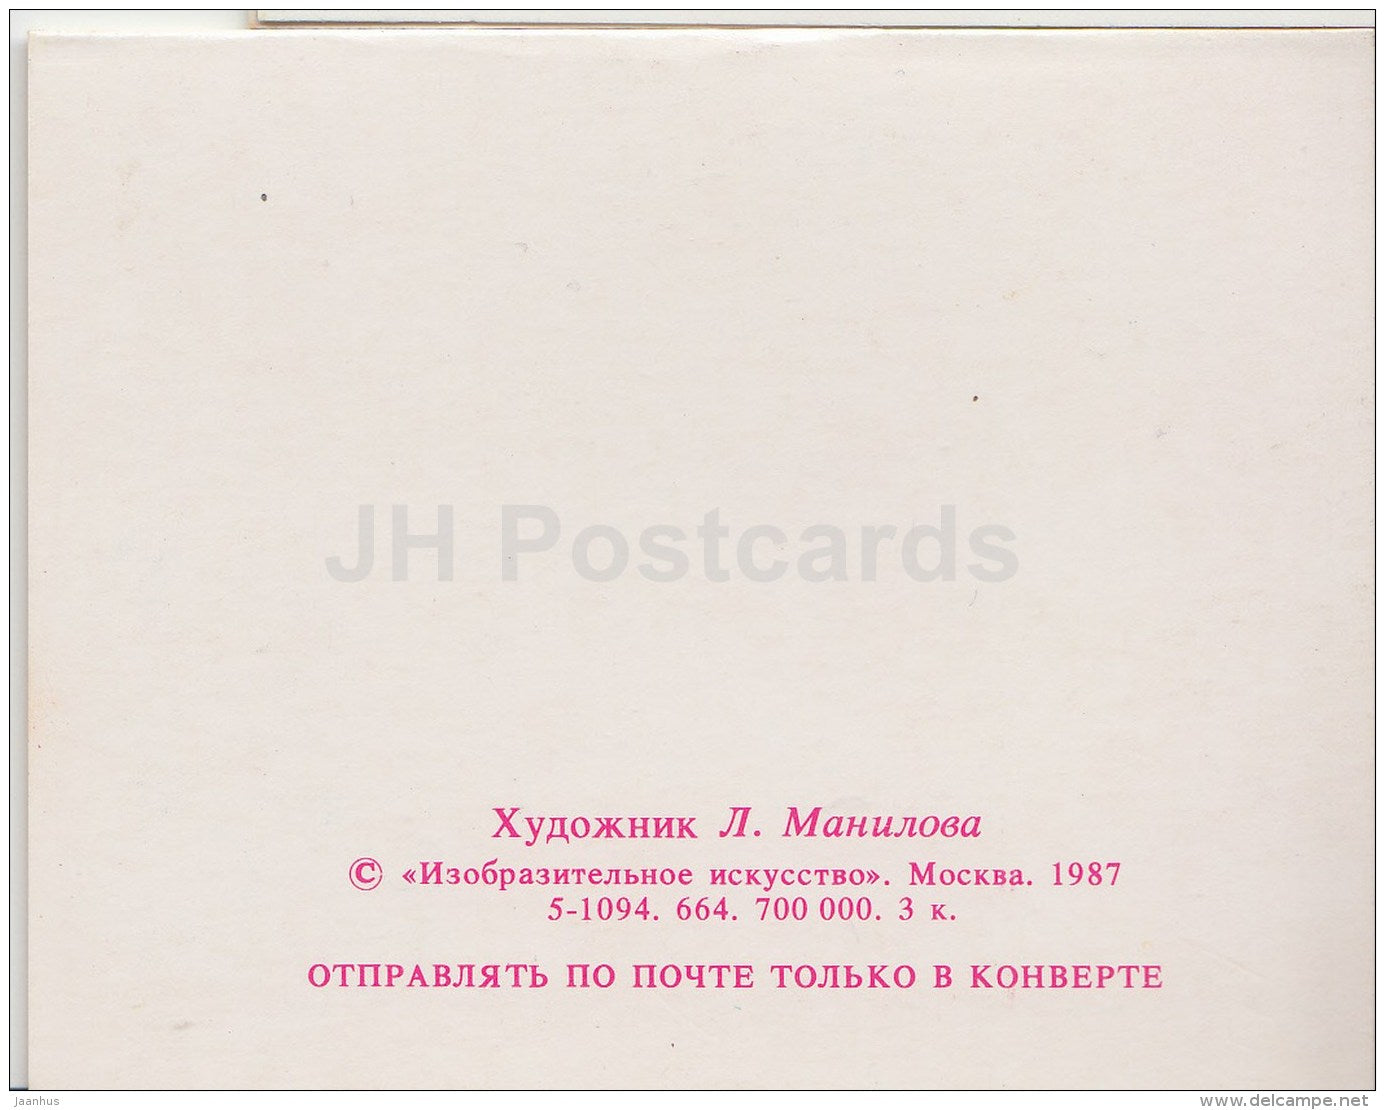 mini birthday greeting card by L. Manilova - butterfly - flowers - 1987 - Russia USSR - unused - JH Postcards